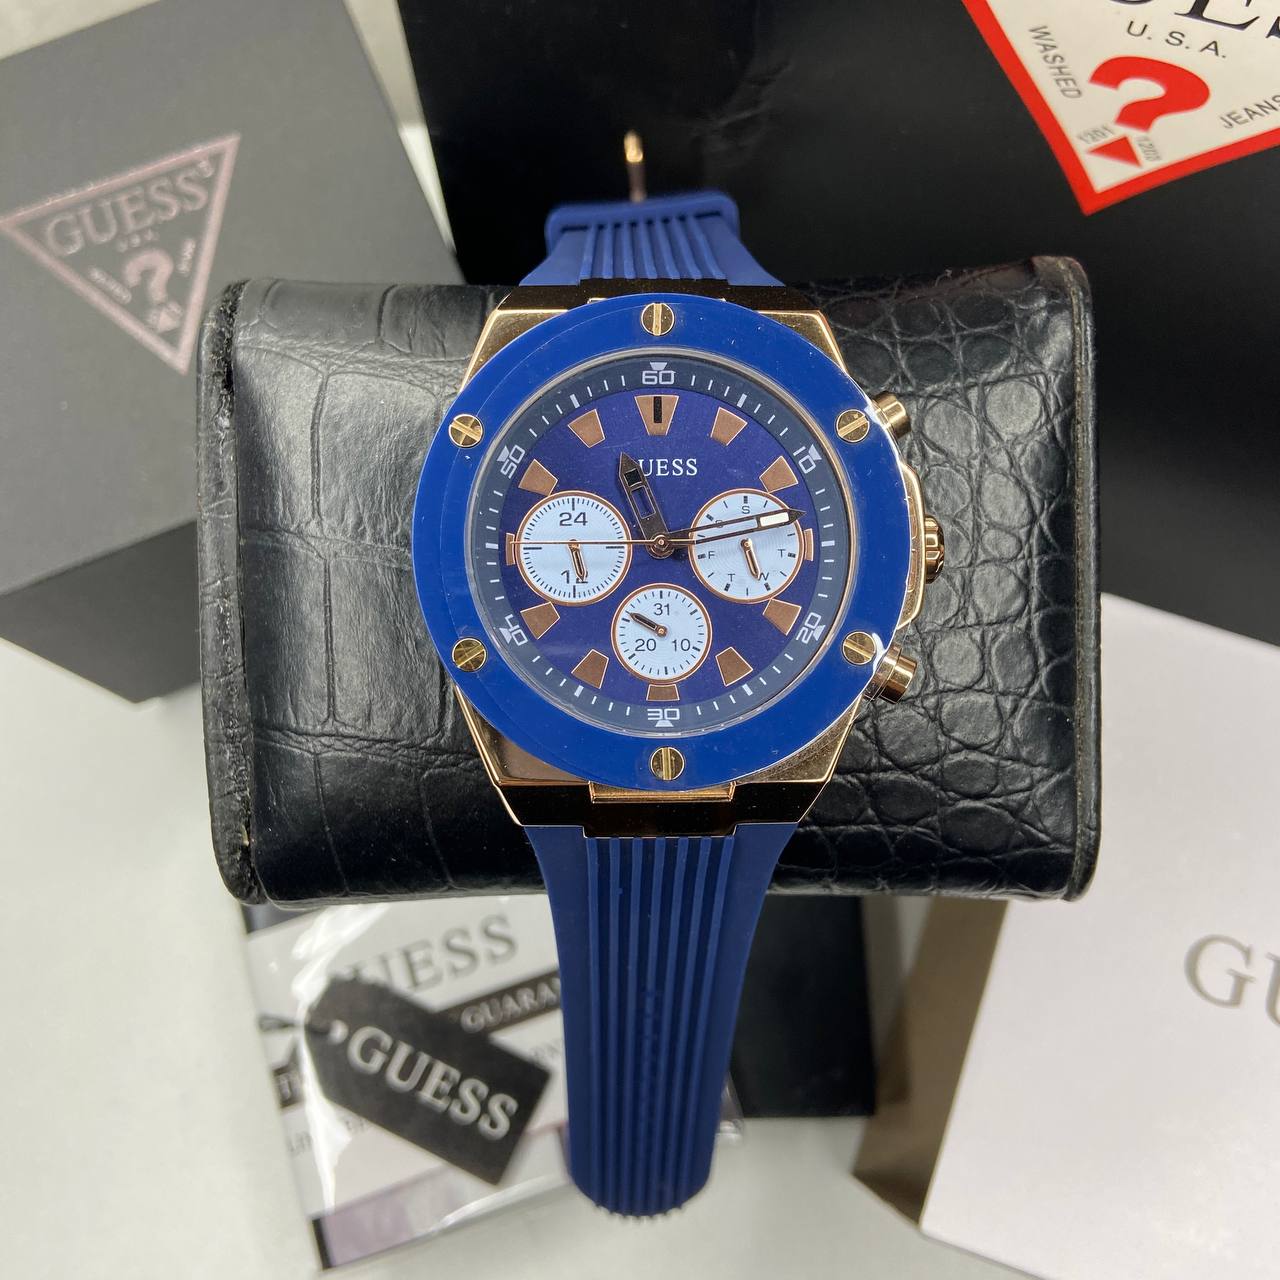 Guess Blue-Rosegold Silicone Watch GW0057G2